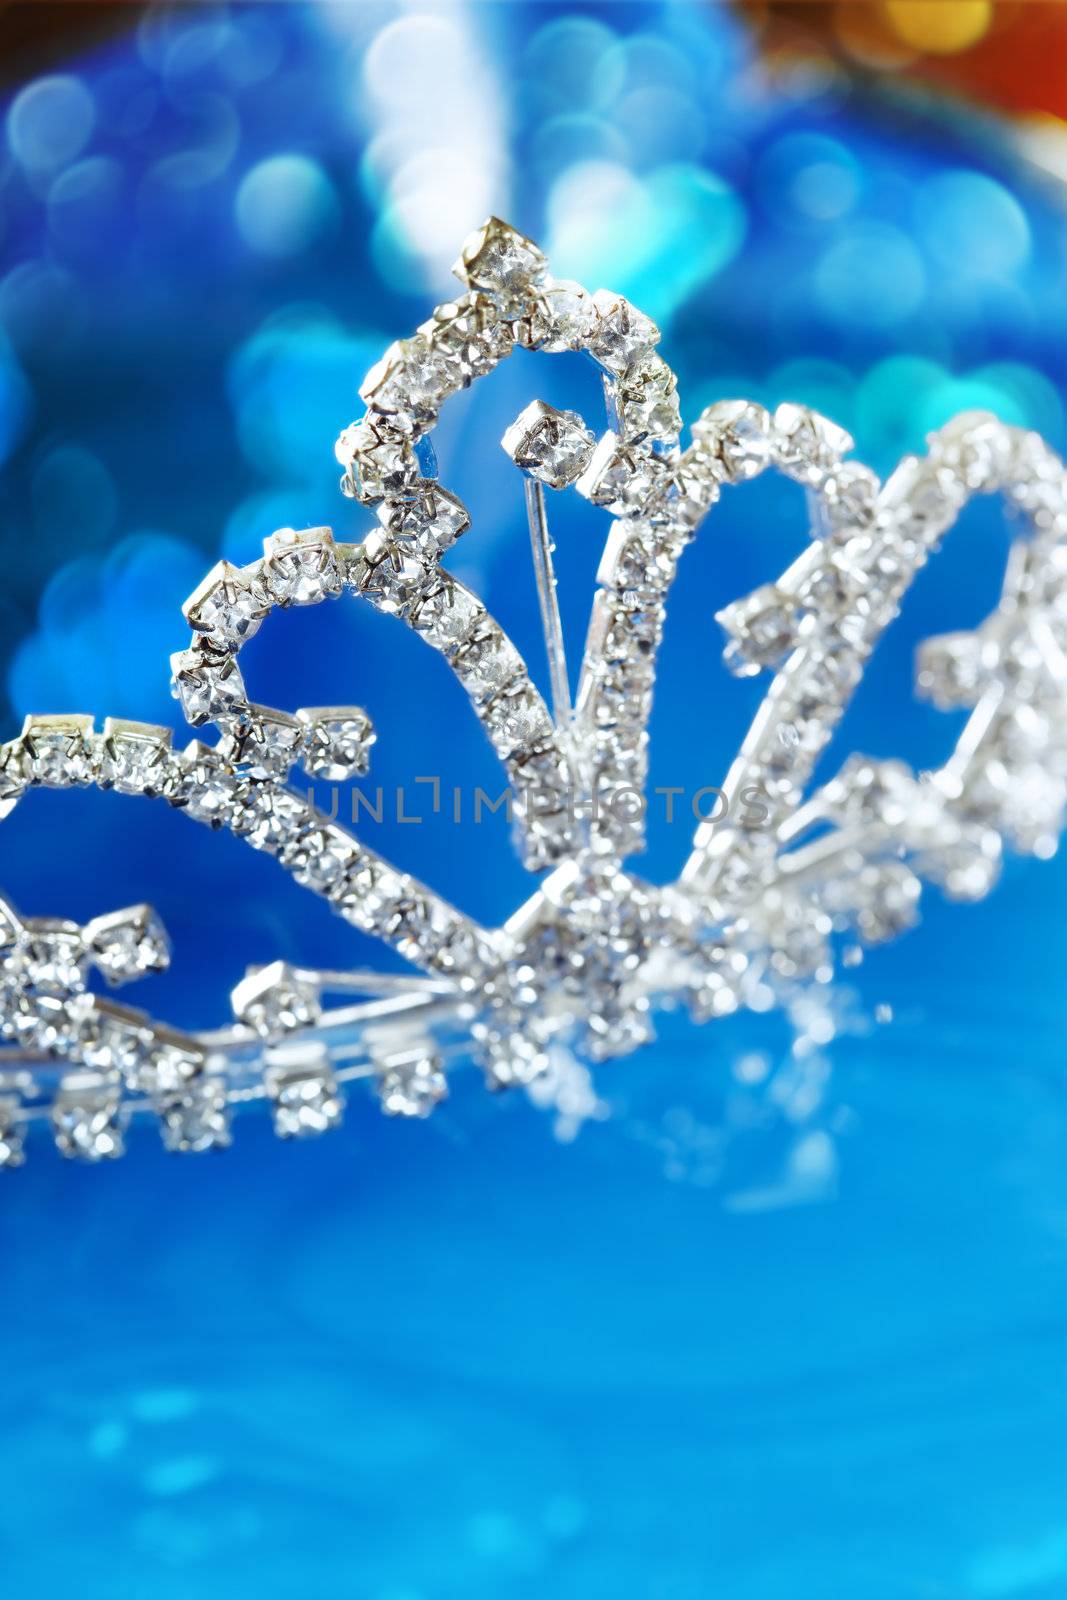 Close-up photo of the silver diadem with diamonds on a blue background with bokeh. Shallow depth of field added by macro lens for natural view